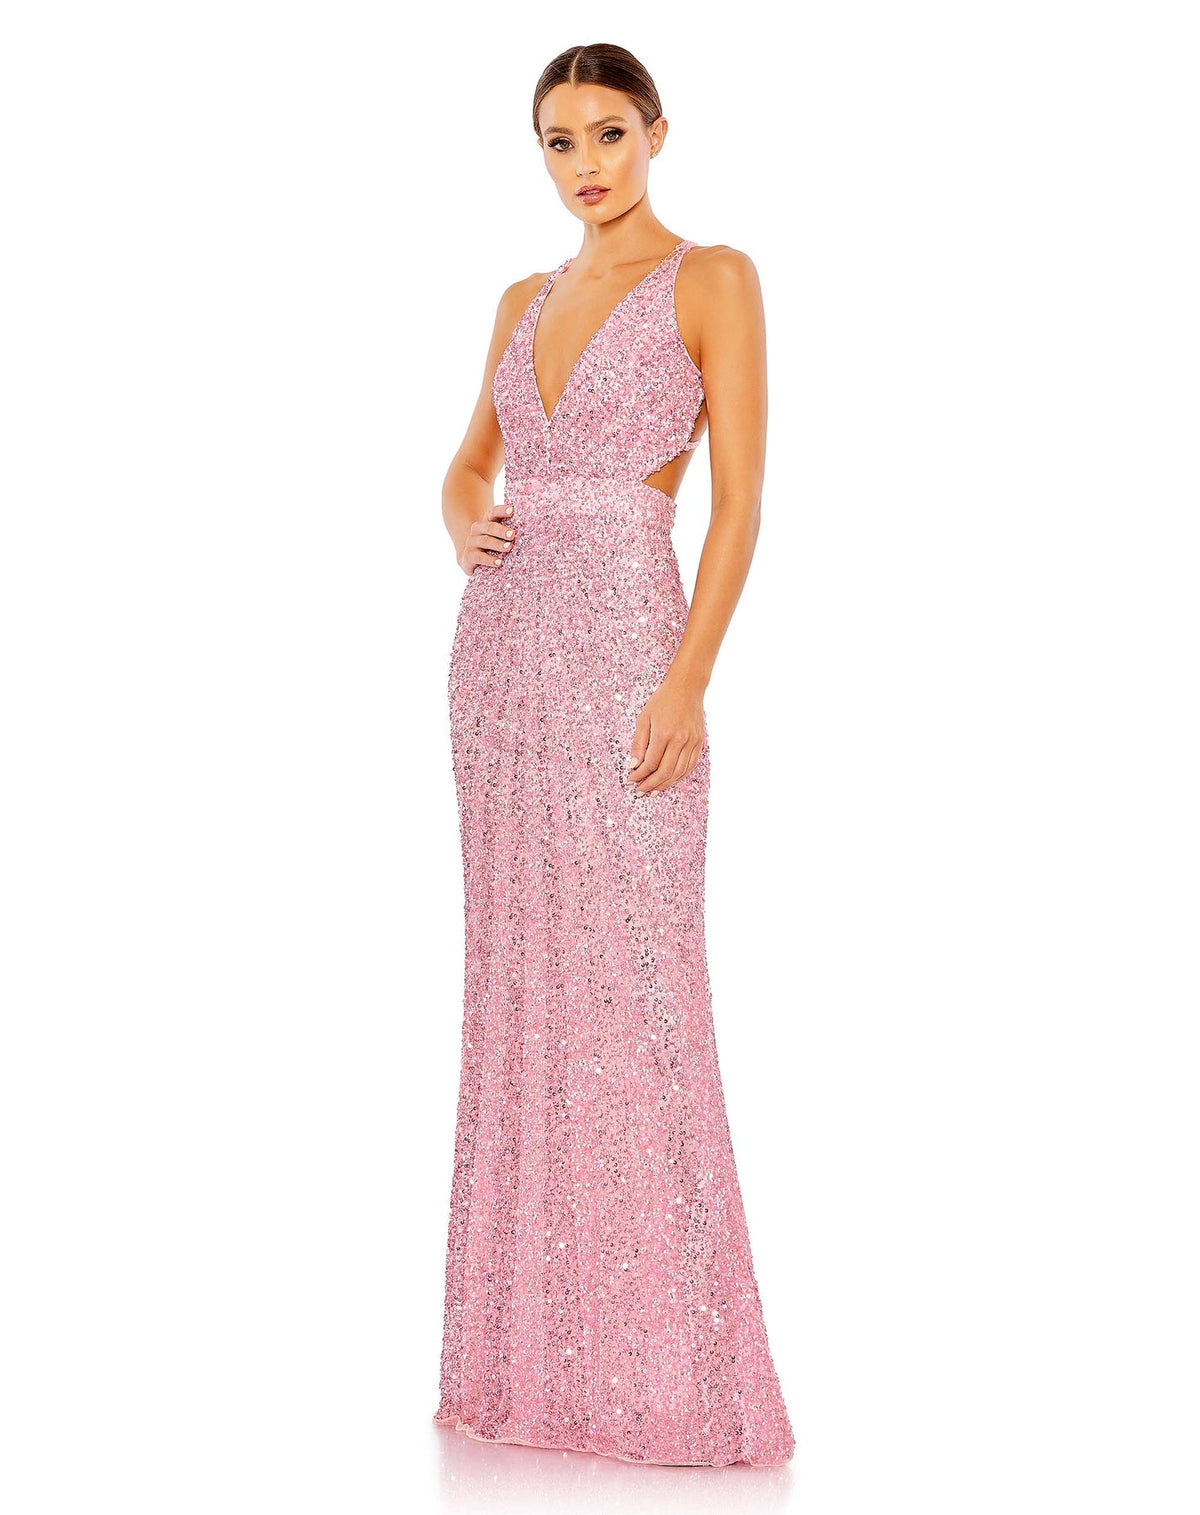 Criss cross cut out sequin gown - Pink * Style #5686 * Designer: Mac Duggal